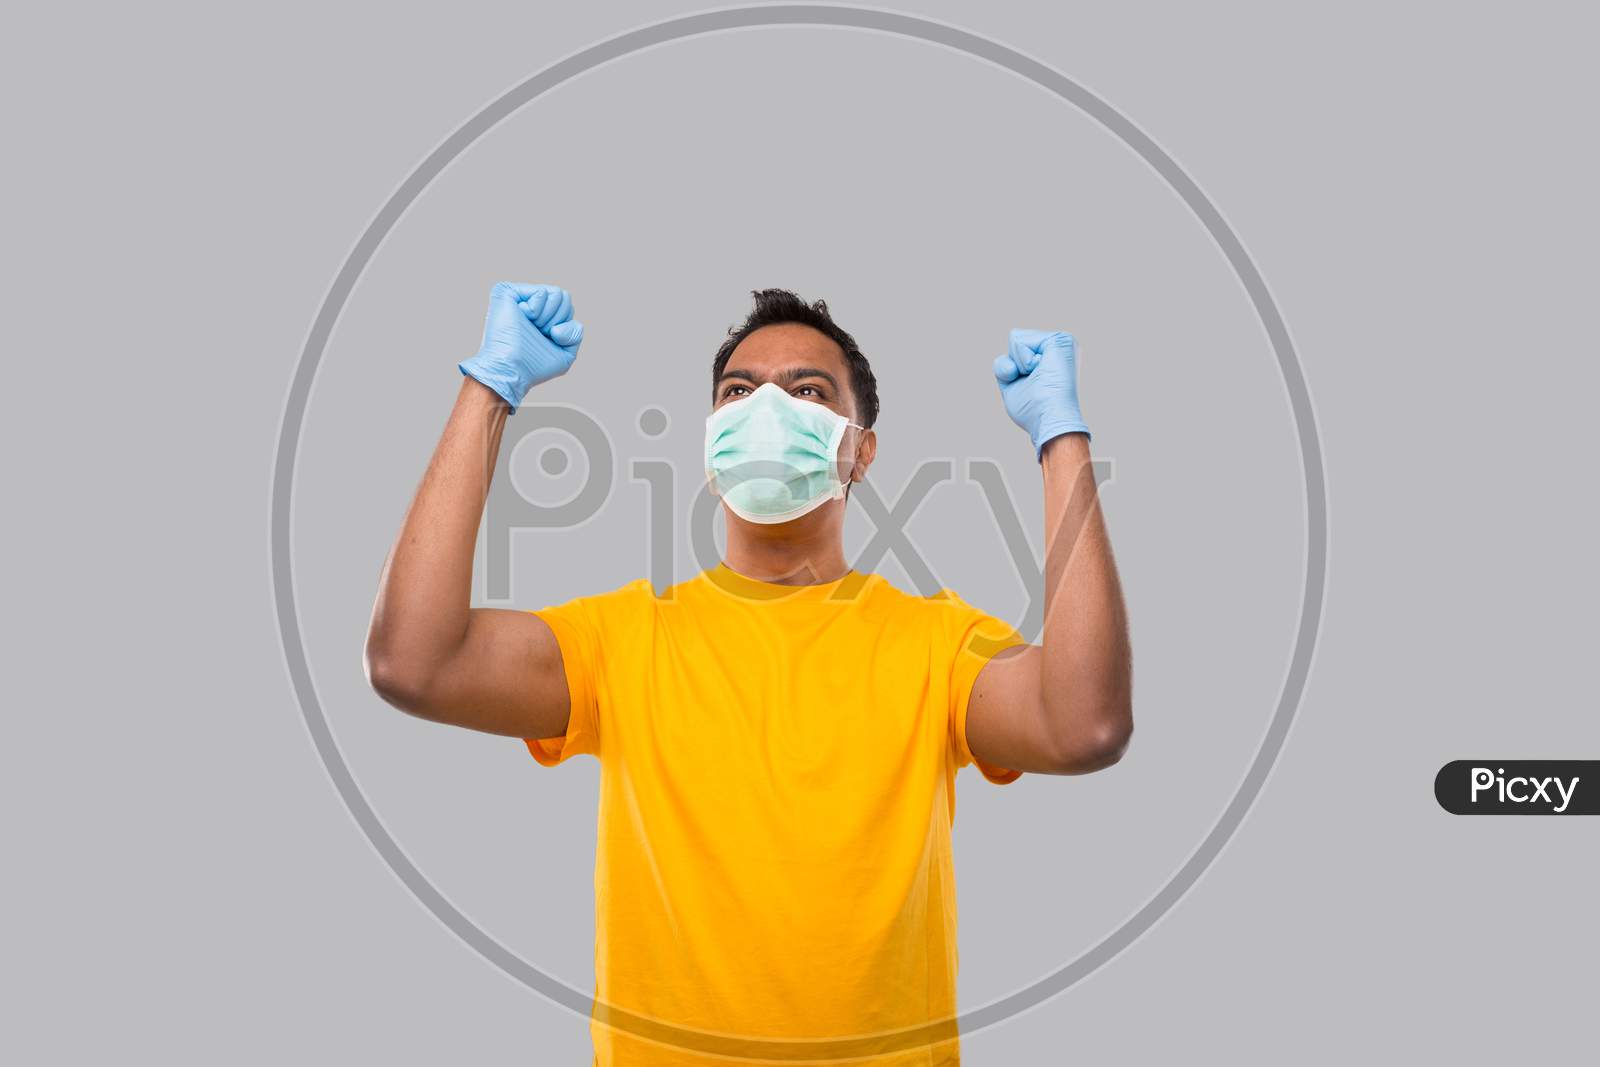 Indian Man Very Happy And Excited, Raising Arms, Celebrating A Victory Or Success Wearing Medical Mask And Gloves. Winner Sign. Indian Man Isolated